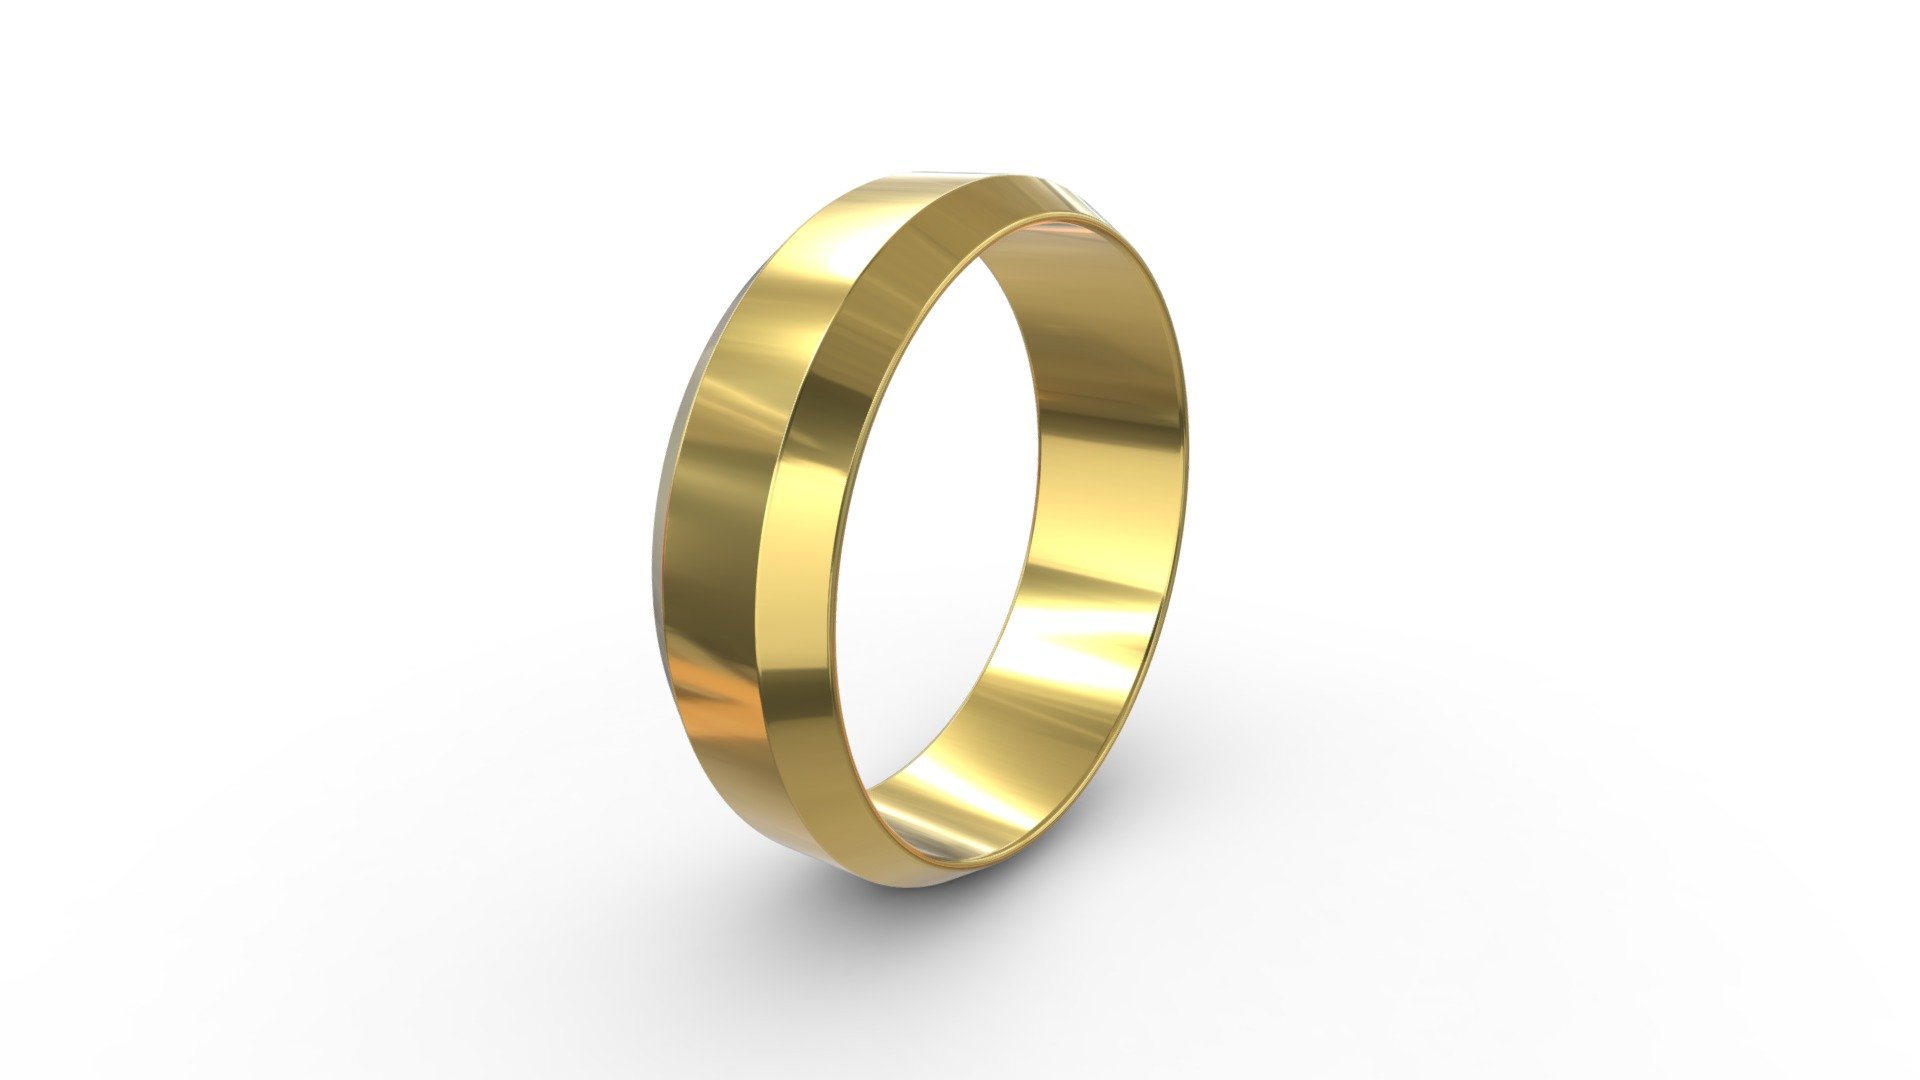 Chamfered Edge Ring



Size:

Height: 20.7 mm

Width: 20.7 mm

Depth 6mm

Inside: 18.19mm

Thickness: 1,25mm ~ 0.3mm

Volume: 371.340 cubic millimeters

Approximate weight:

18k Gold: 5.77g

14k Gold: 5.12g

Silver 950: 3.78g
 - Chamfered Edge Ring - Download Free 3D model by Busanello 3d model